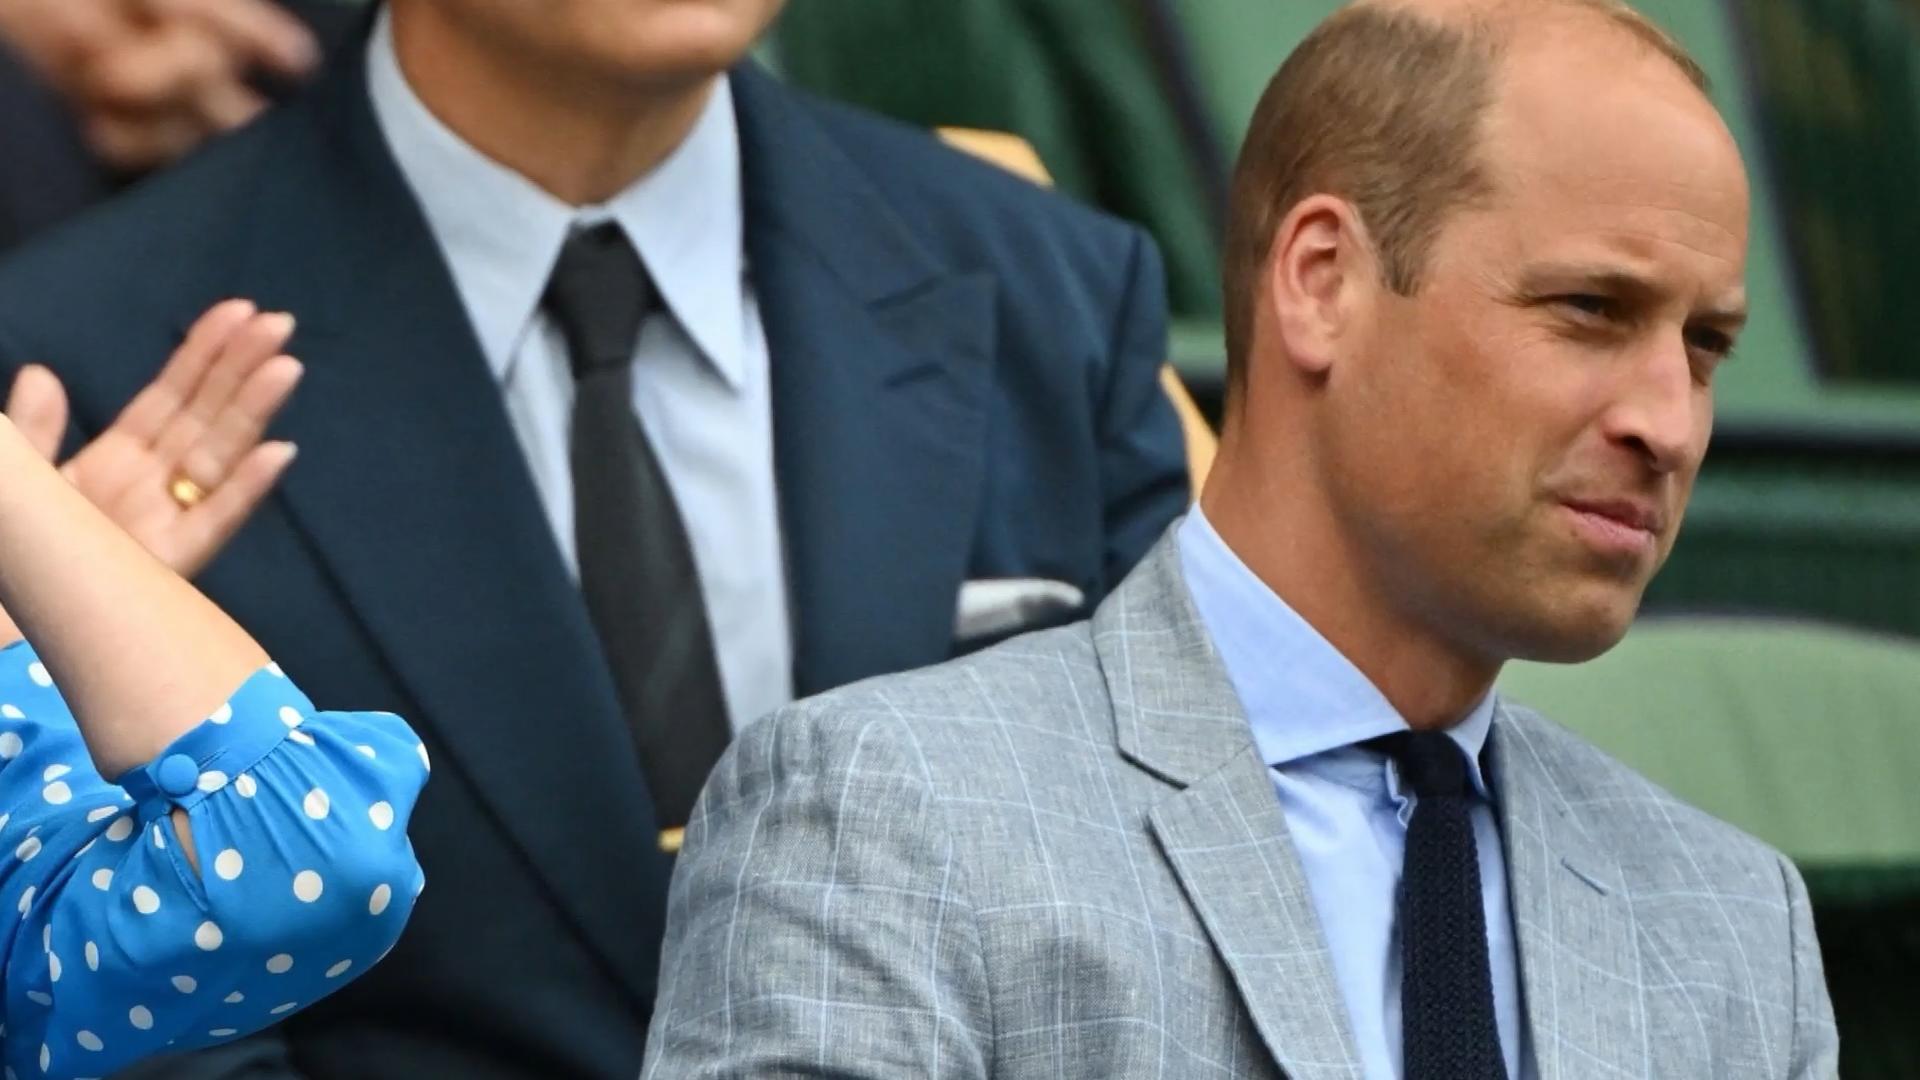 Prince William lets his emotions run wild Sympathetic swearing